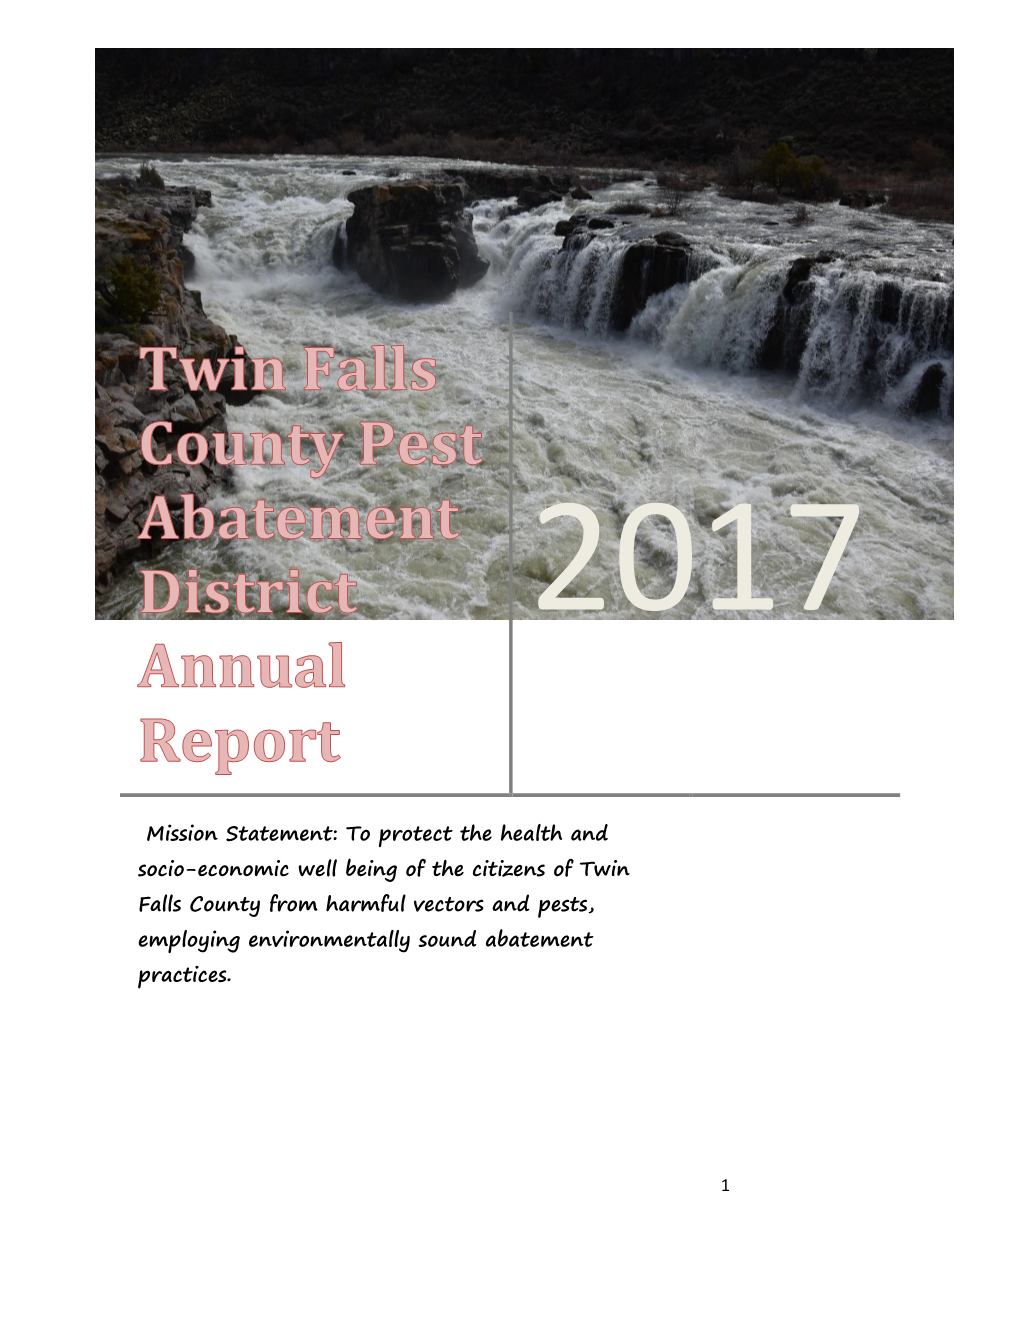 Twin Falls County Pest Abatement District Annual Report